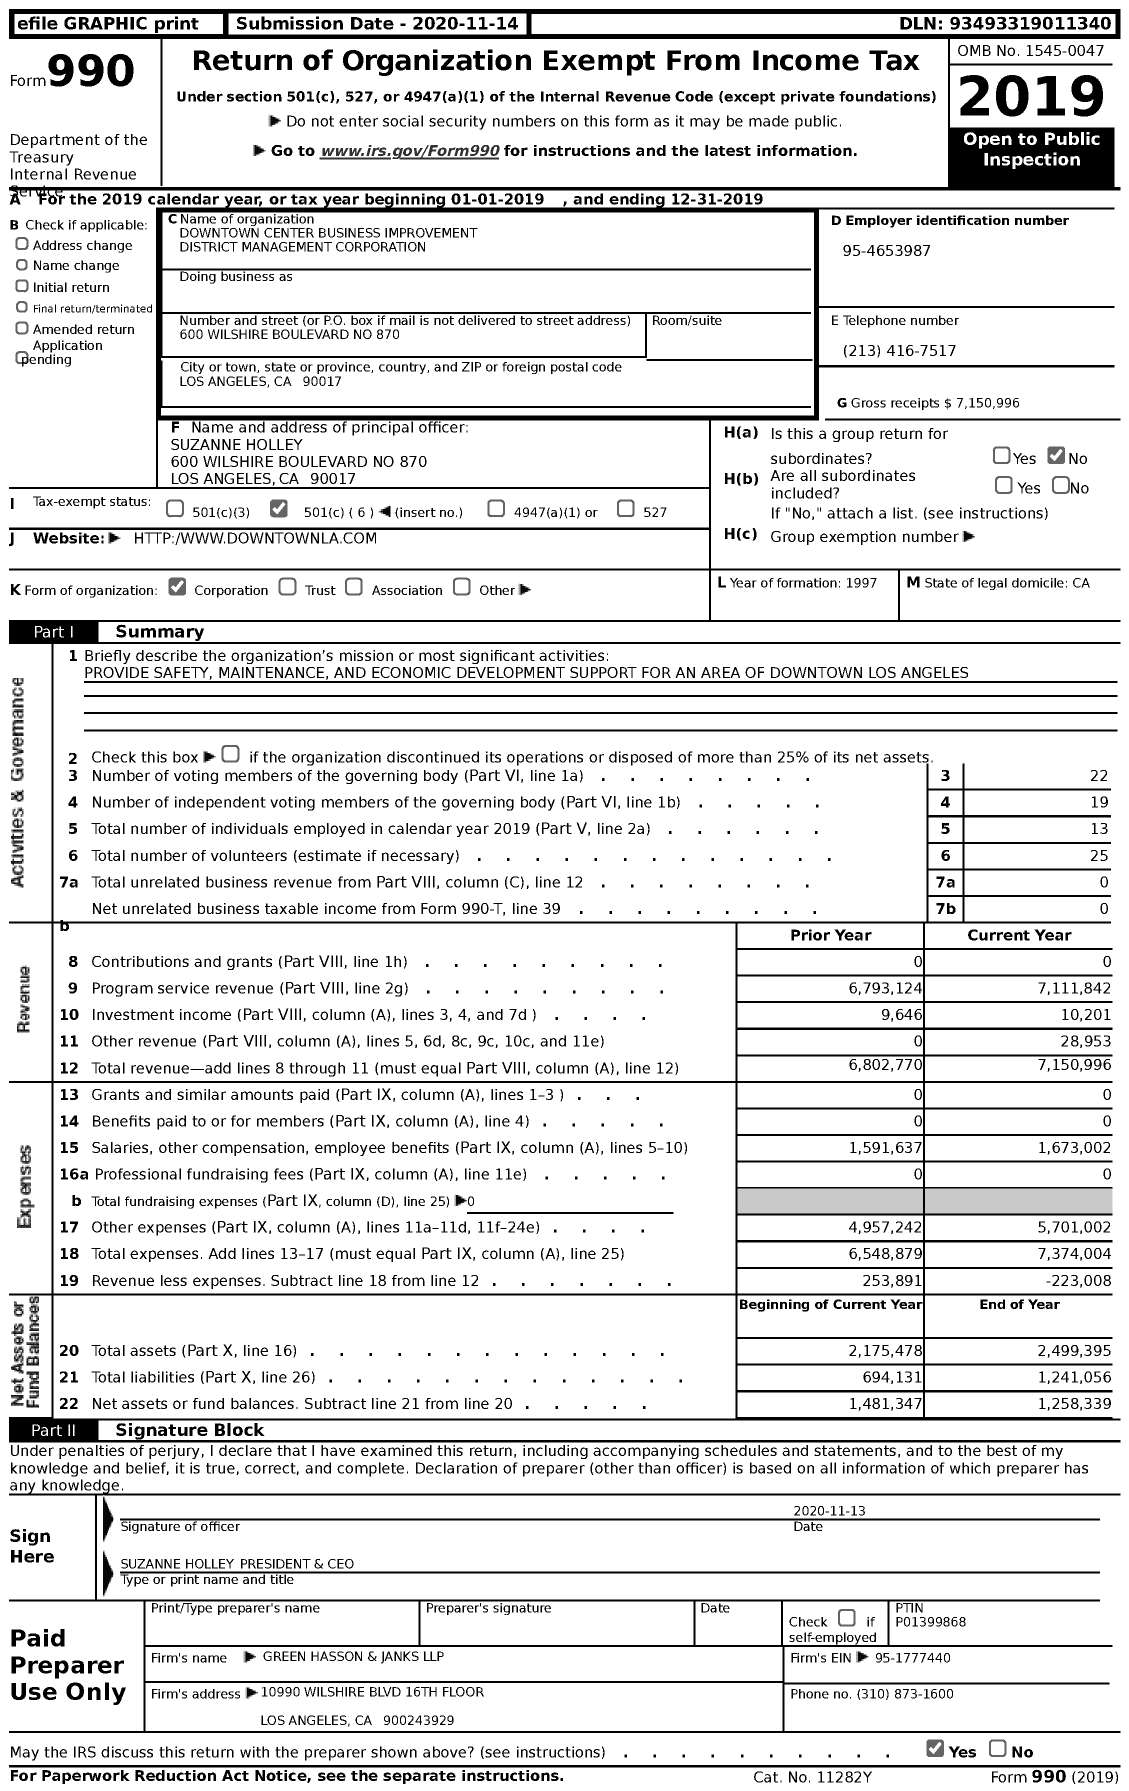 Image of first page of 2019 Form 990 for Downtown Center Business Improvement District Management Corporation